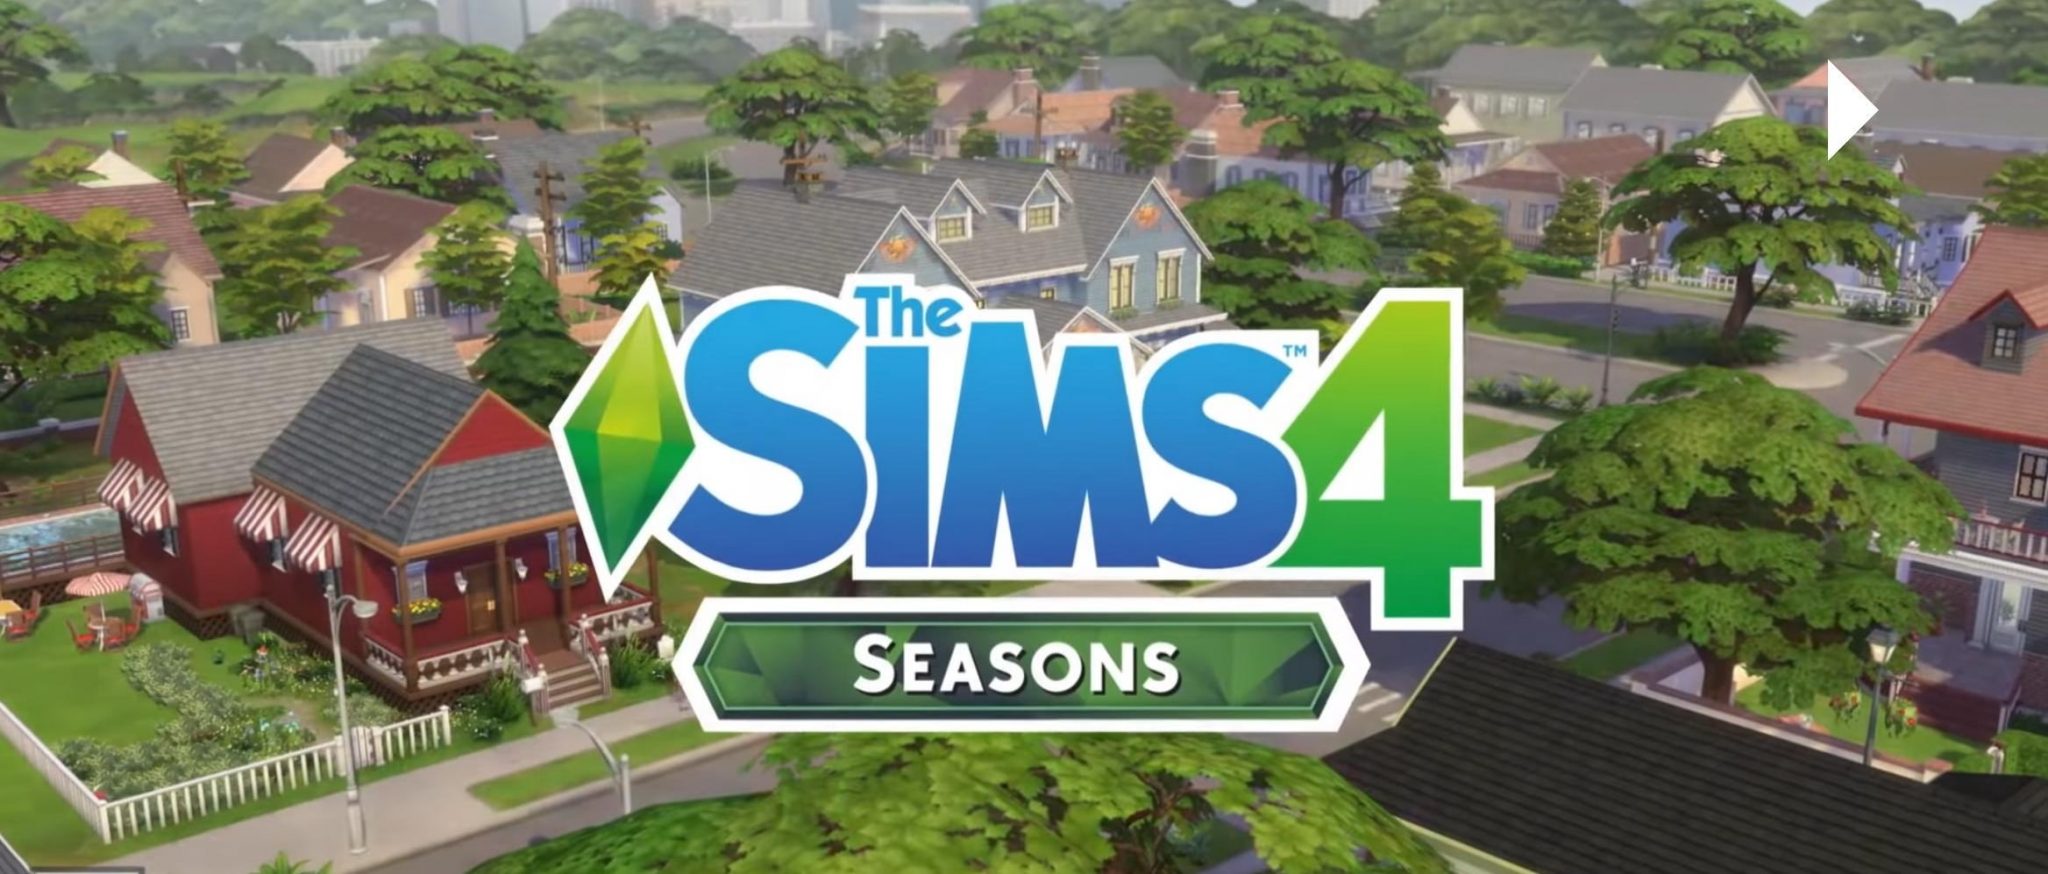 Sims 4 free expansion download